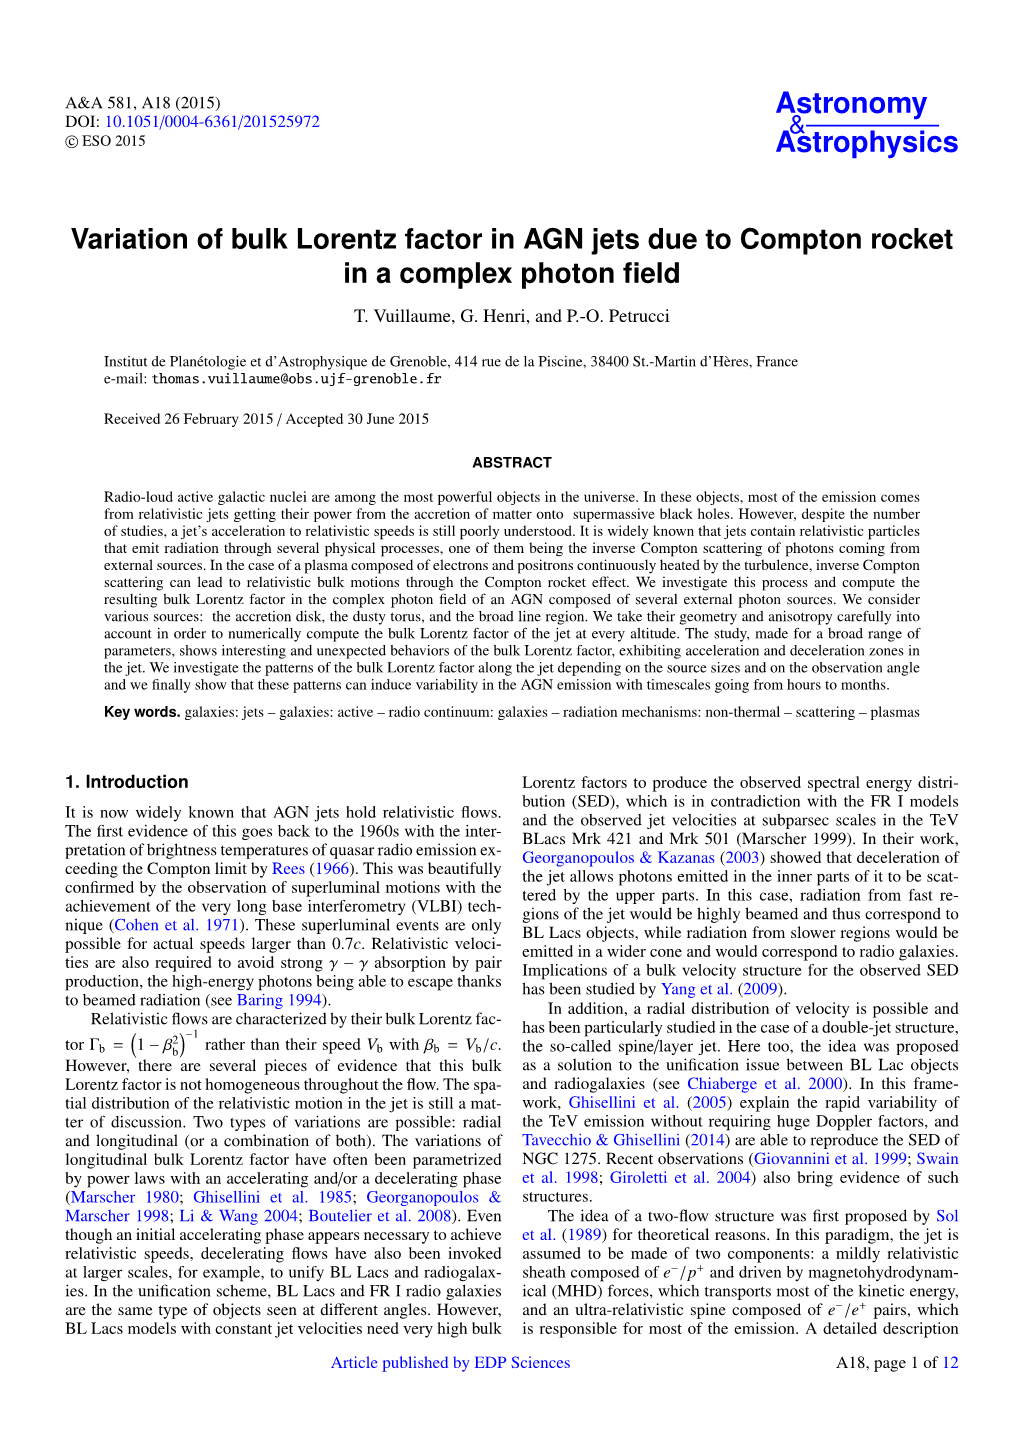 Variation of Bulk Lorentz Factor in AGN Jets Due to Compton Rocket in a Complex Photon ﬁeld T